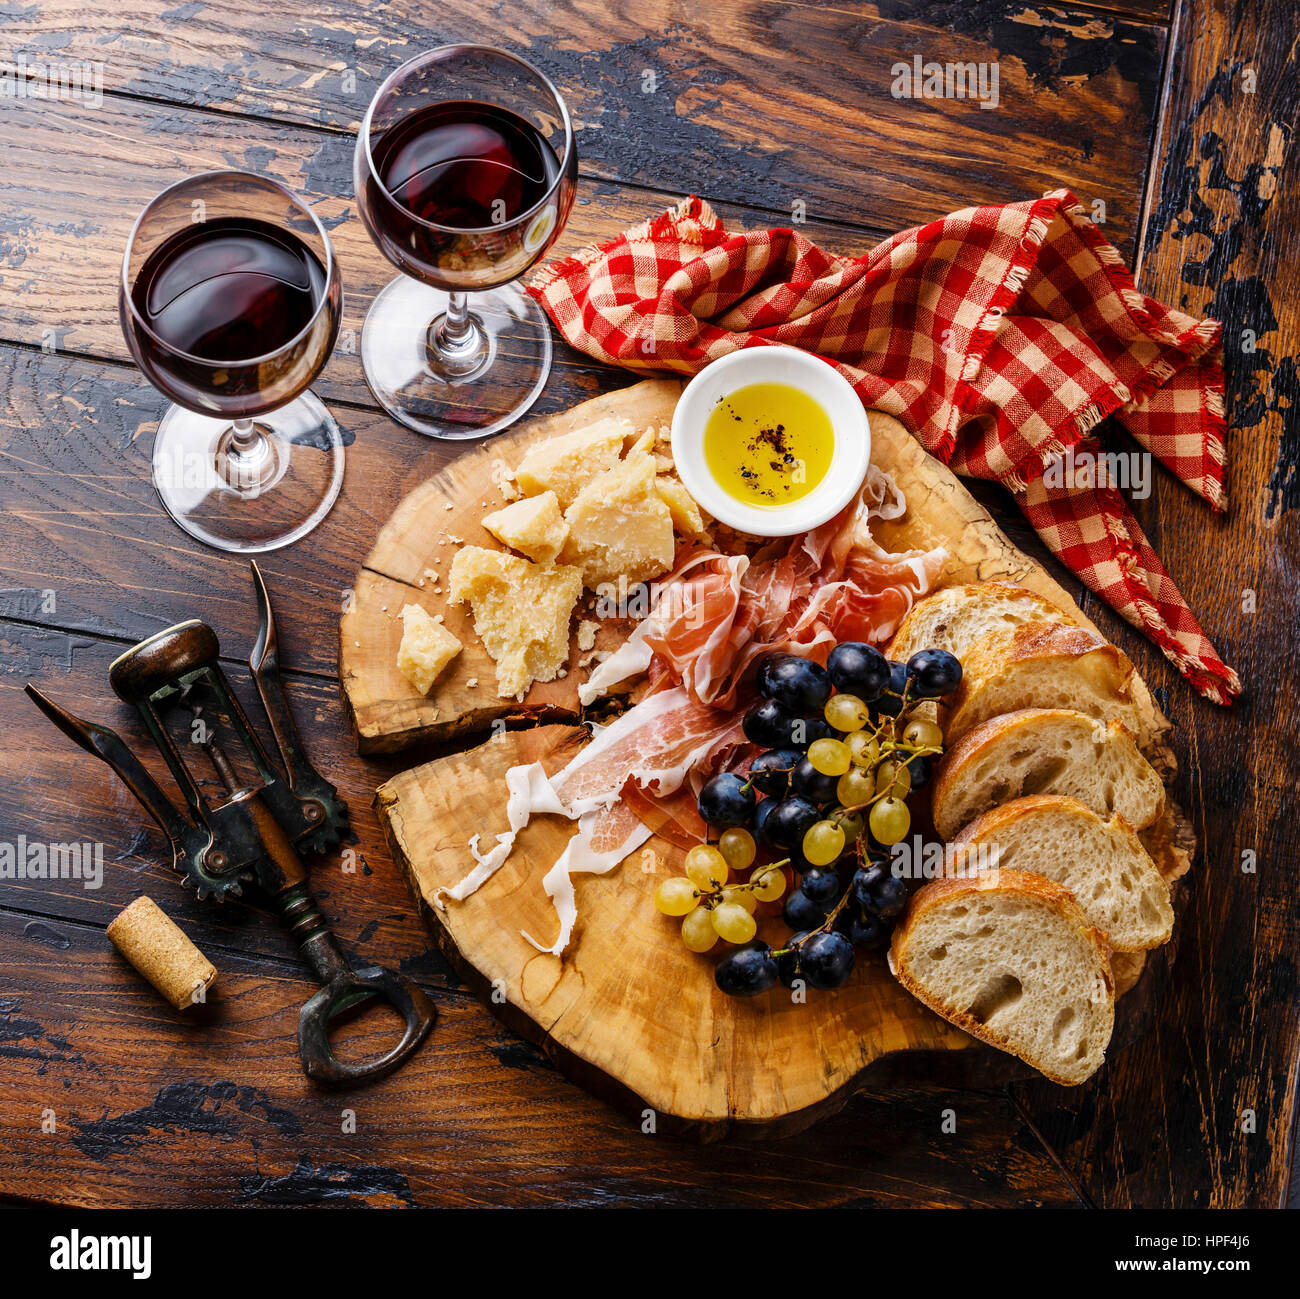 Appetizer ham and cheese plate with wine on wooden table background Stock Photo